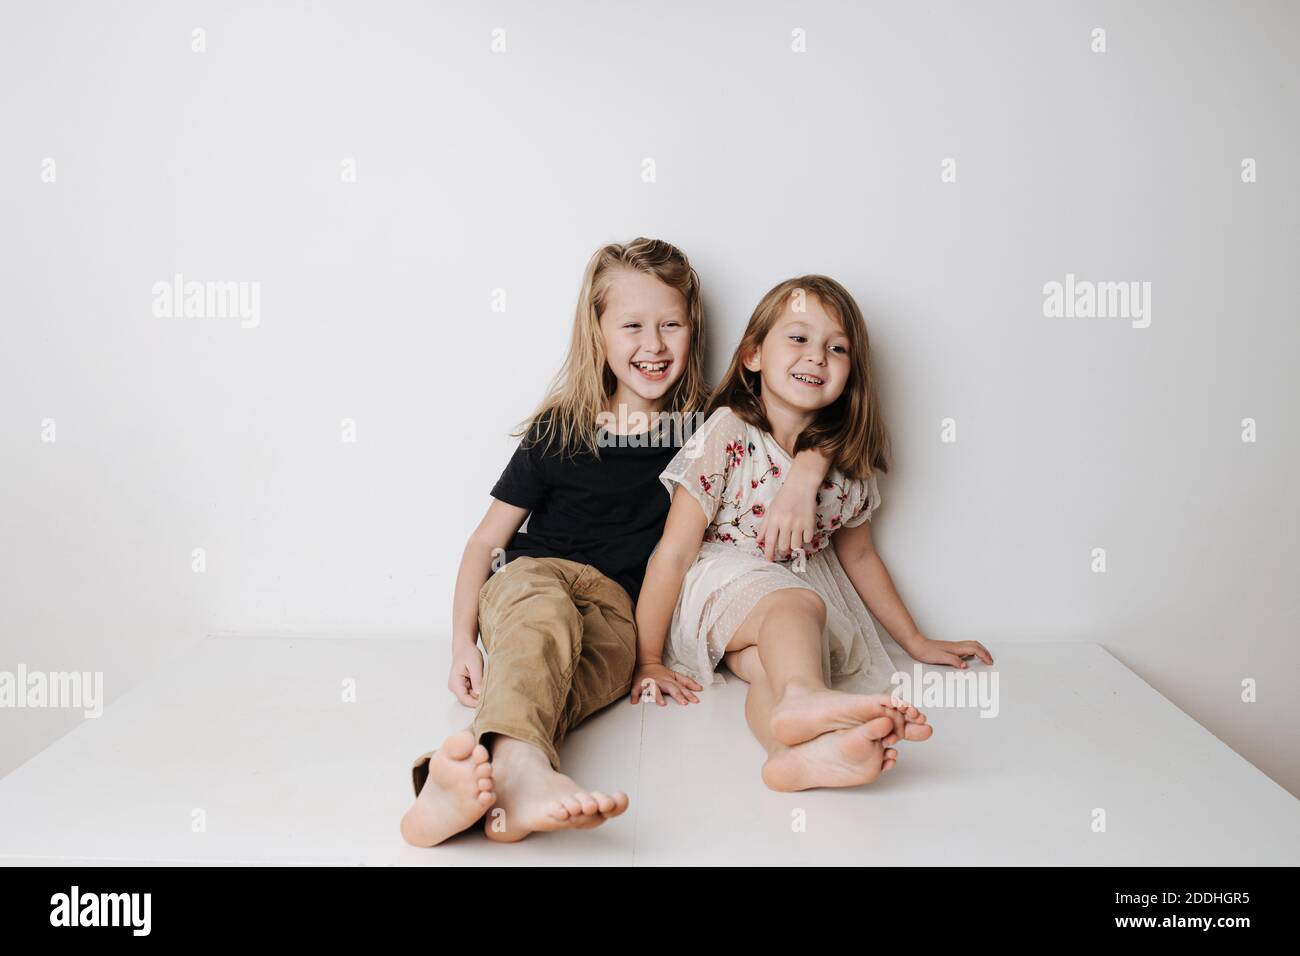 Smiling siblings sitting together on table. Boy hugs girl, she leans away a bit. Stock Photo